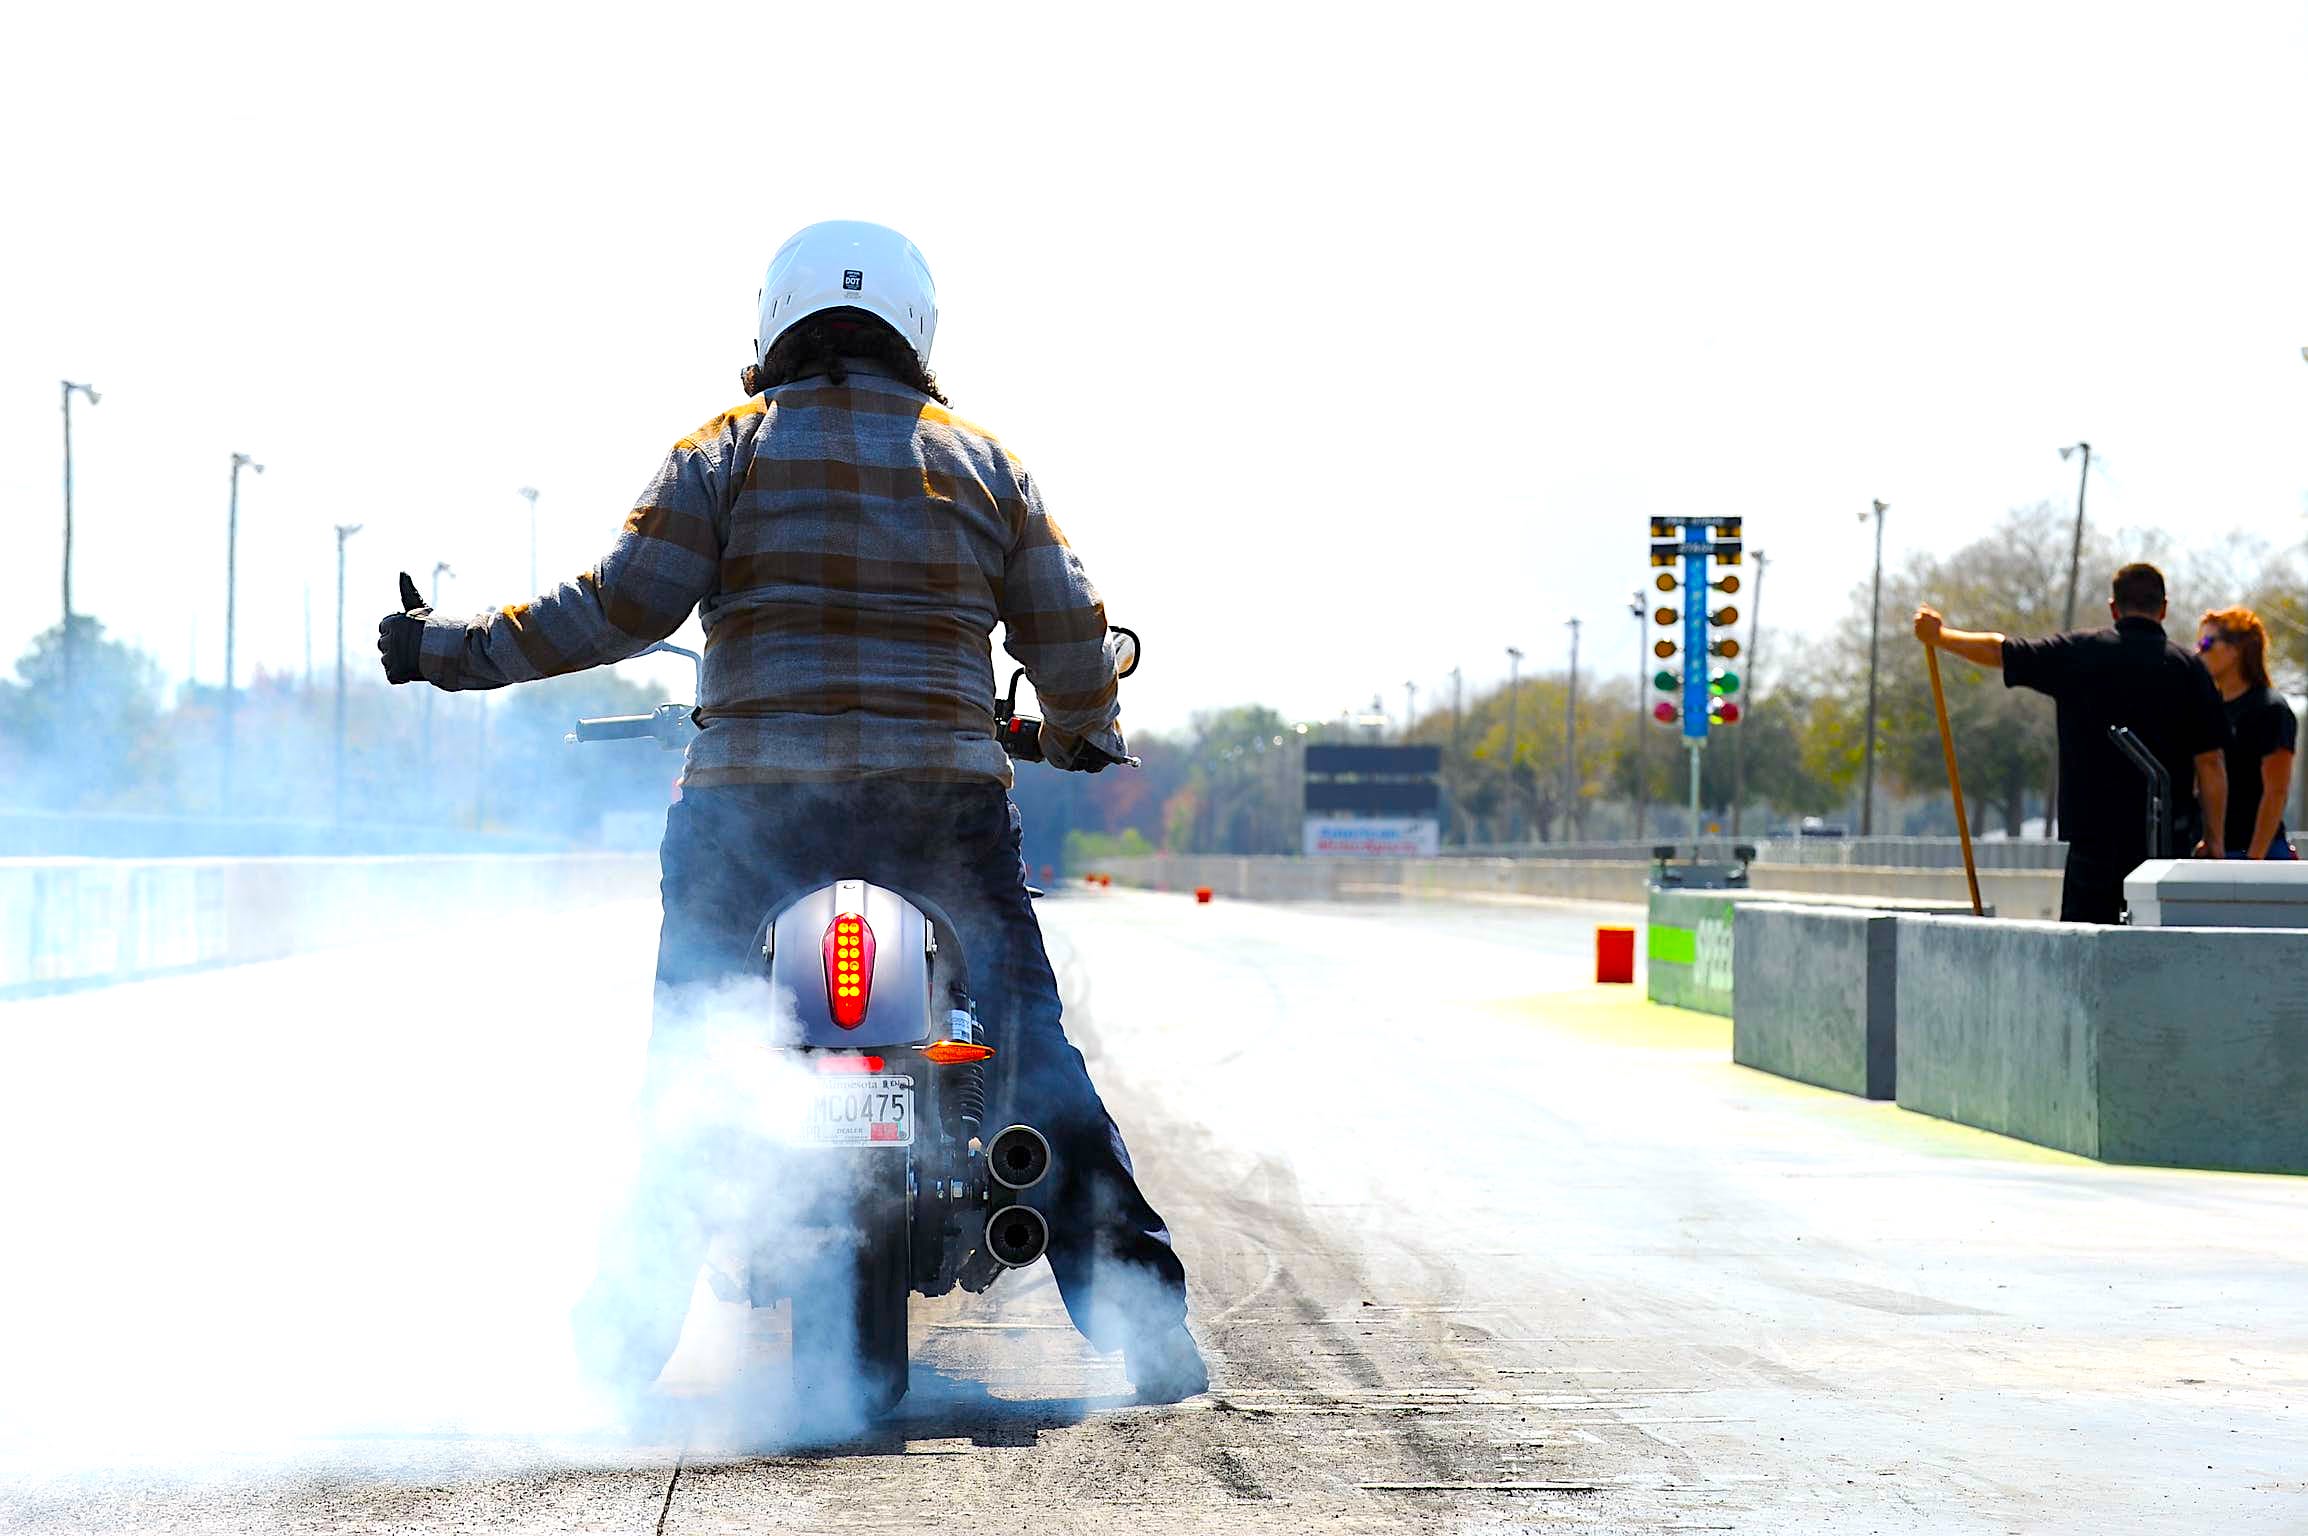 A view of a rider about to launch down a drag strip